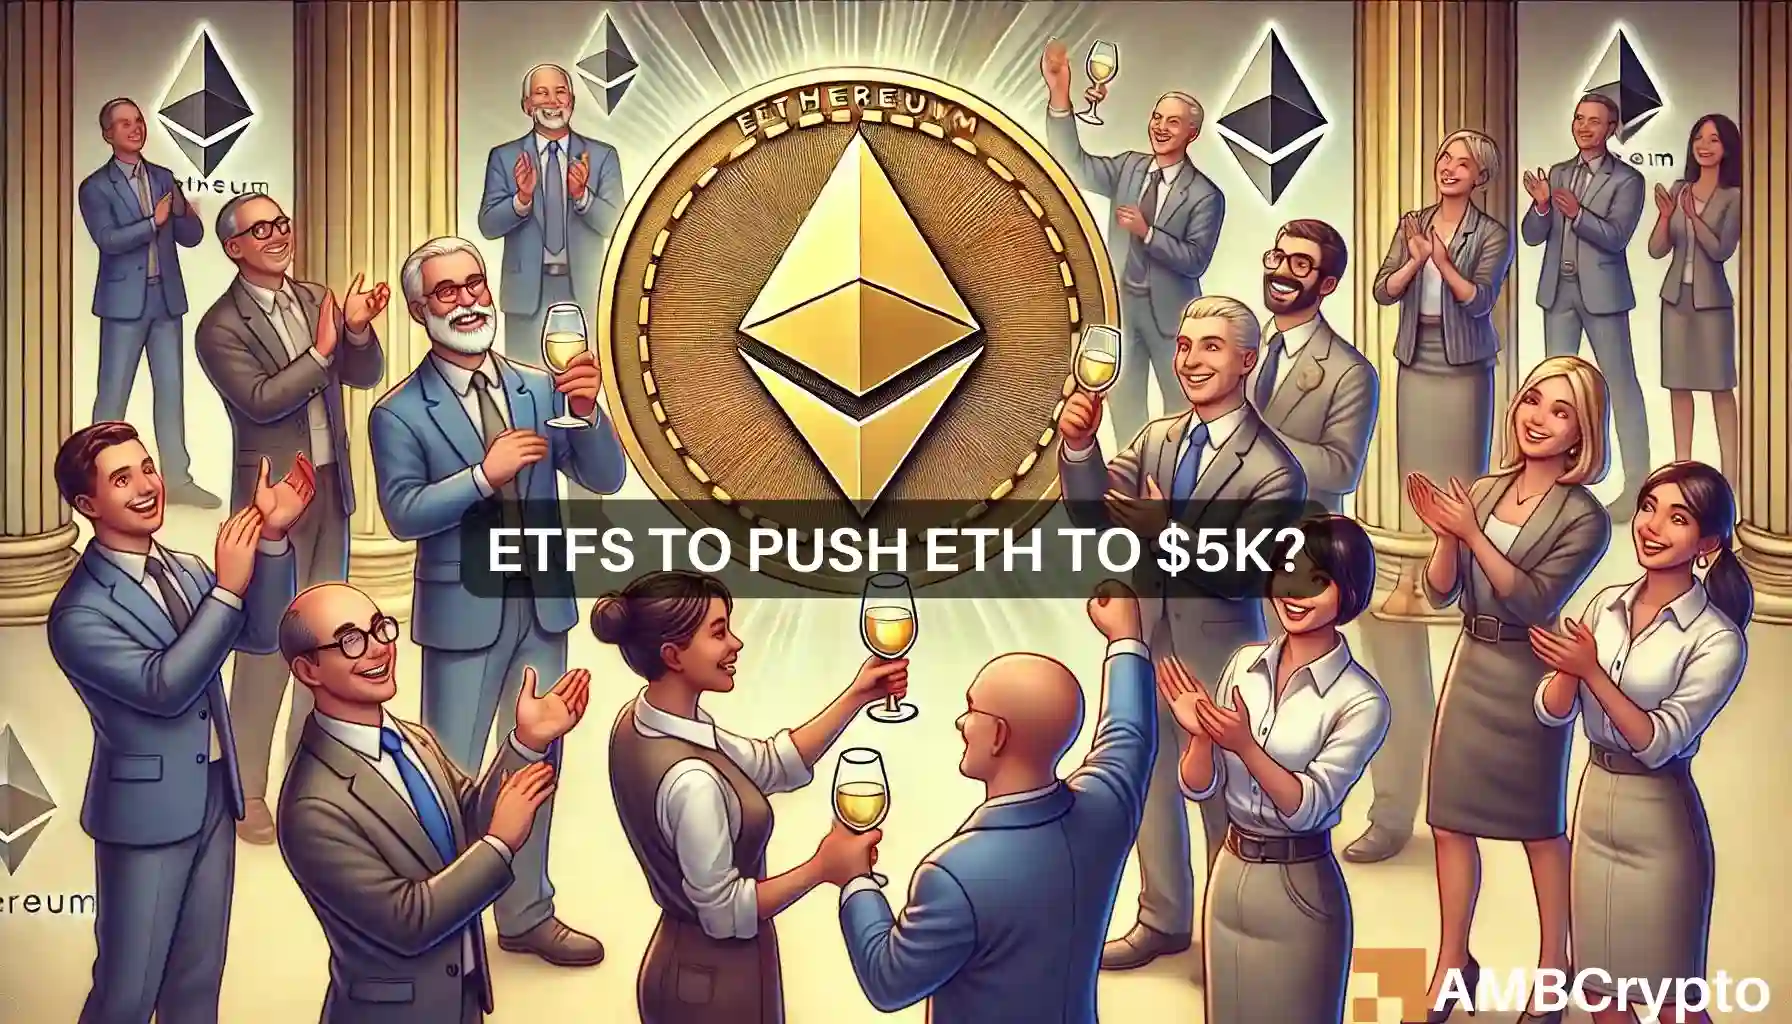 Ethereum to $5000 after Spot ETF launch? These market trends could be key…